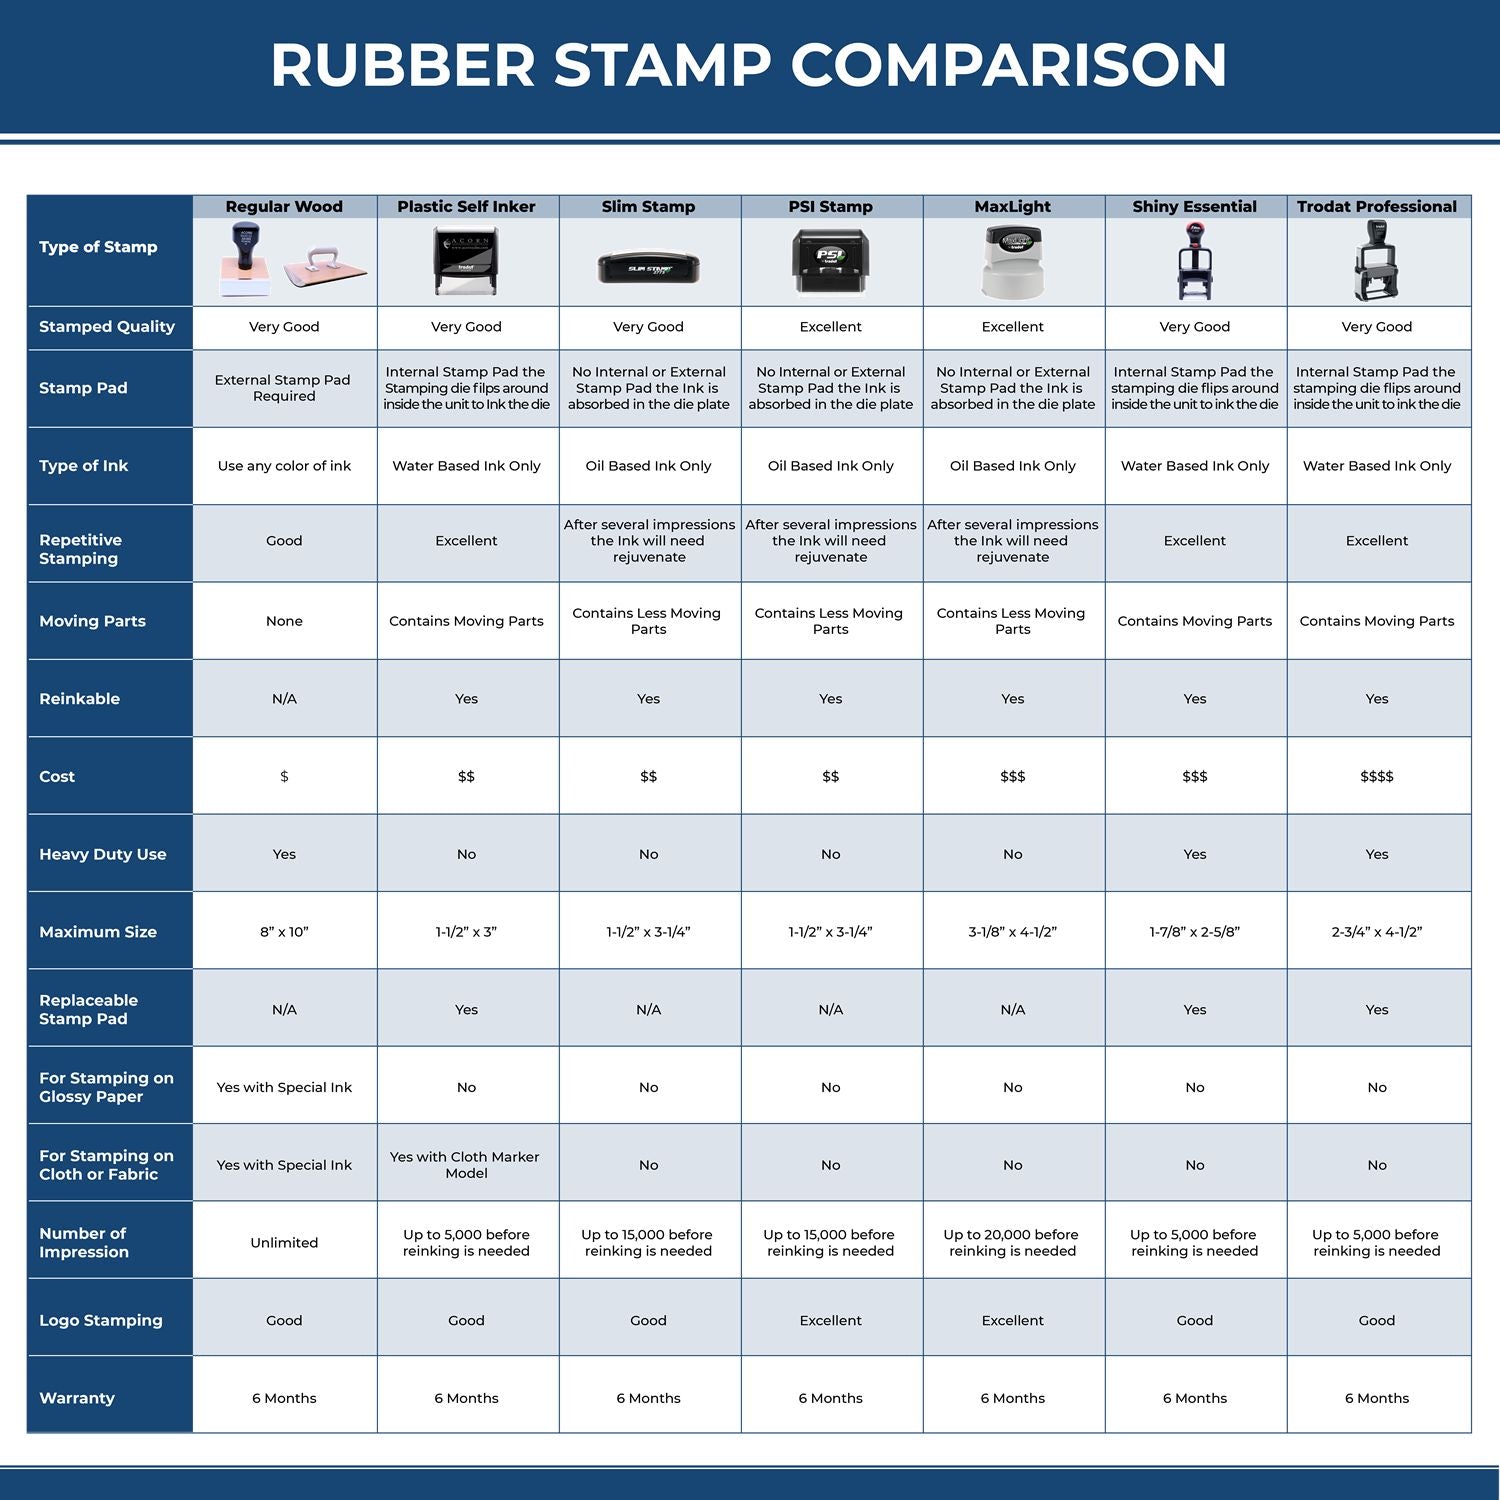 A comparison chart for the different types of mount models available for the Oklahoma Professional Engineer Seal Stamp.